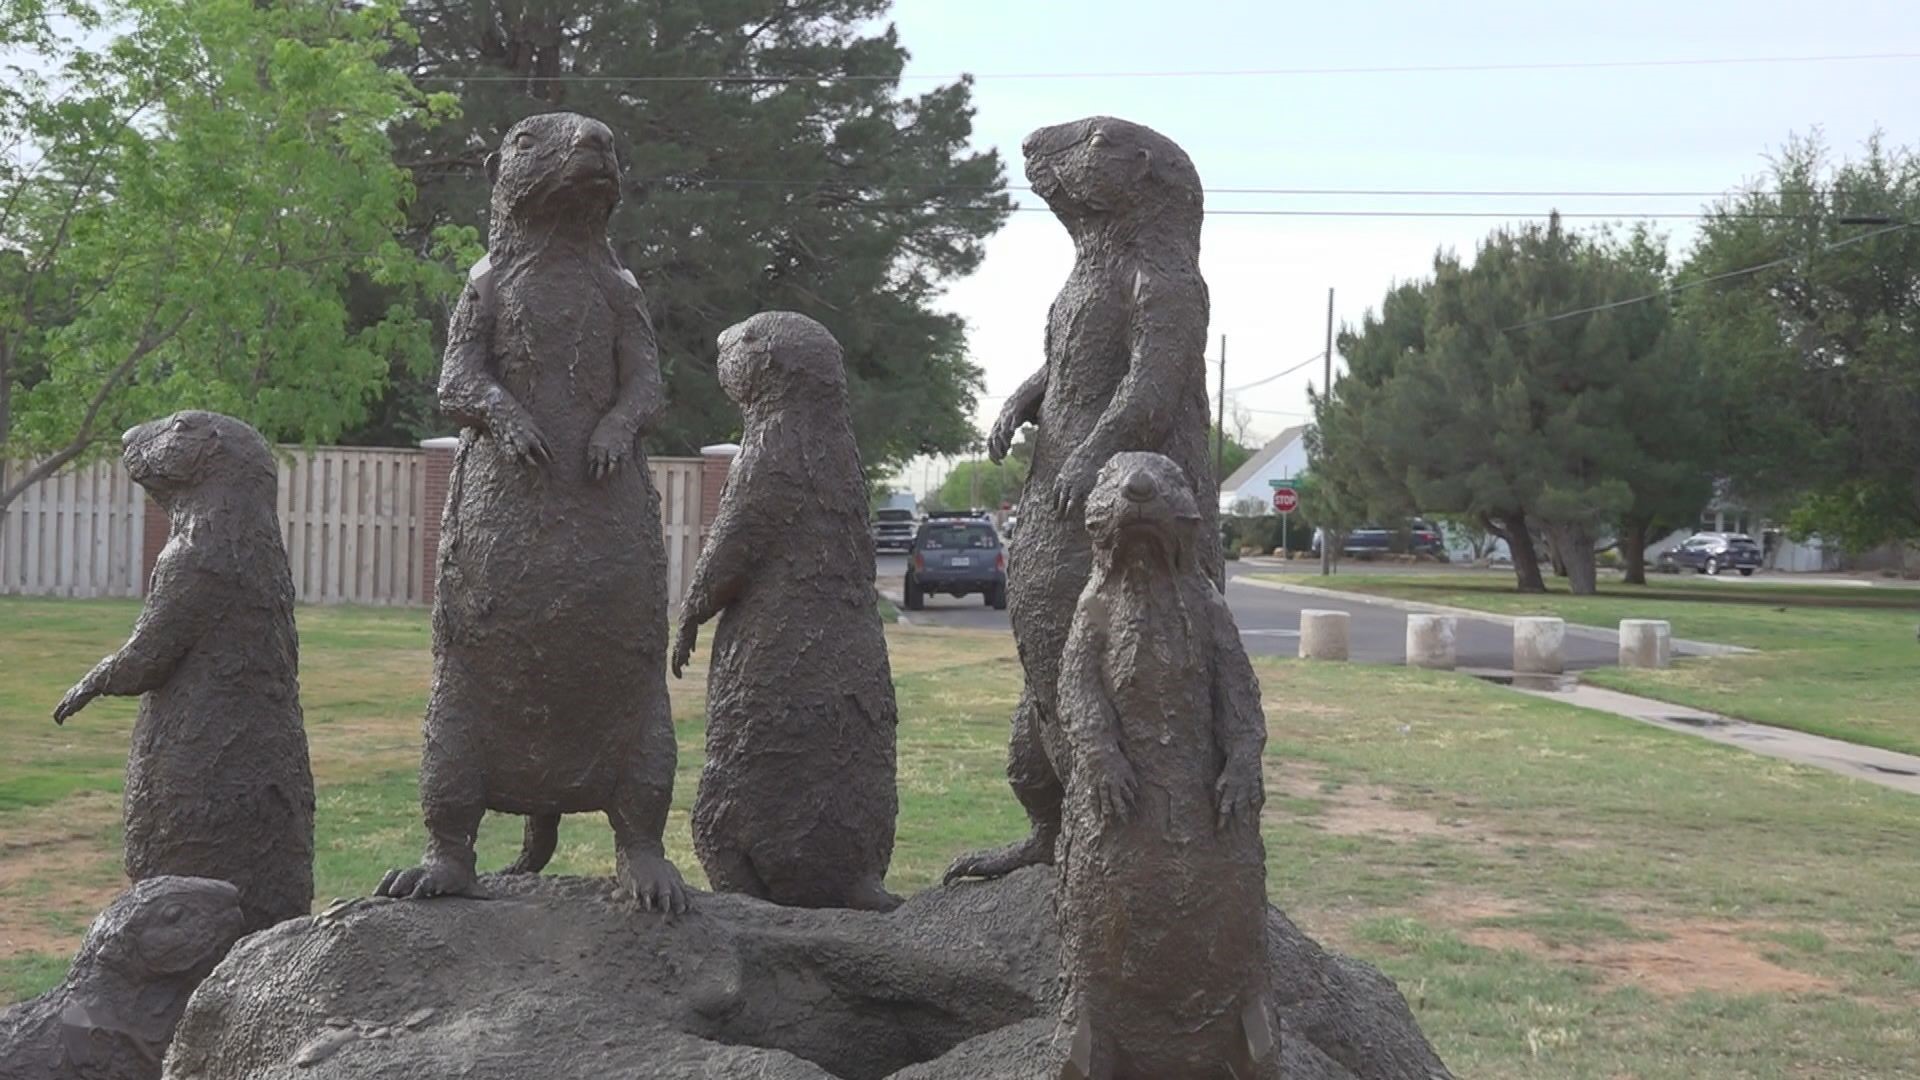 The statue was built by Midland artist Katherine "KT" Taylor. After more than a year of work, the sculpture is far more than just prairie dogs.